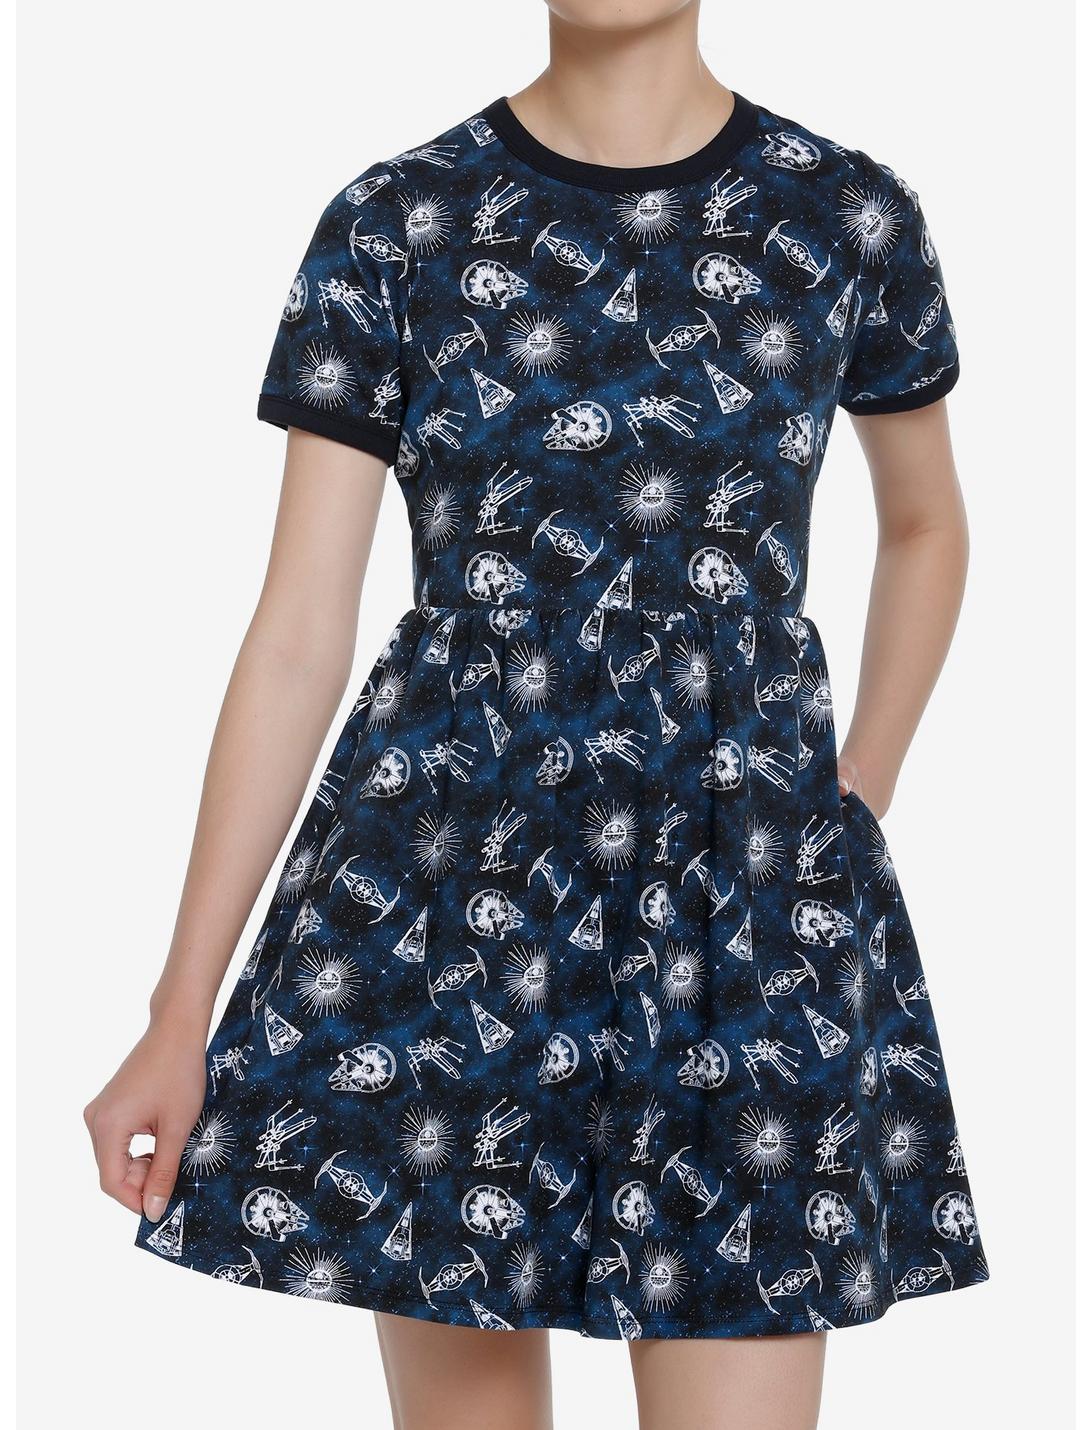 Her Universe Star Wars Spaceships T-Shirt Dress Her Universe Exclusive, MULTI, hi-res